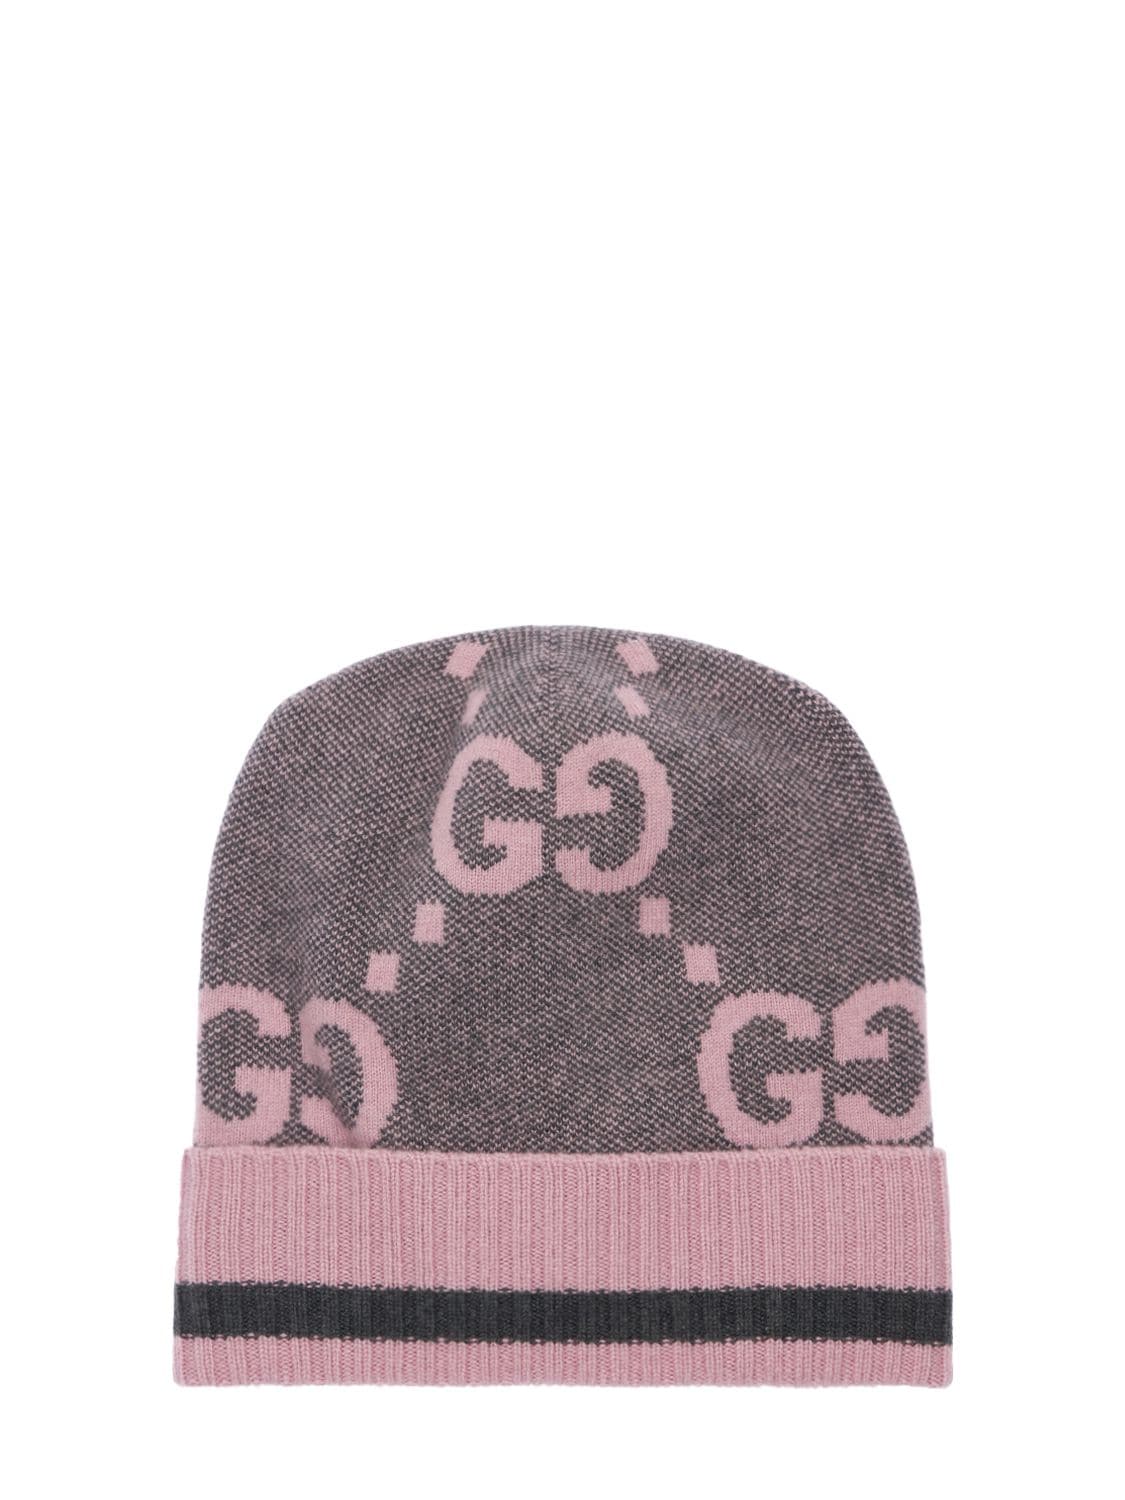 Image of Gg Motif Cashmere Knit Hat